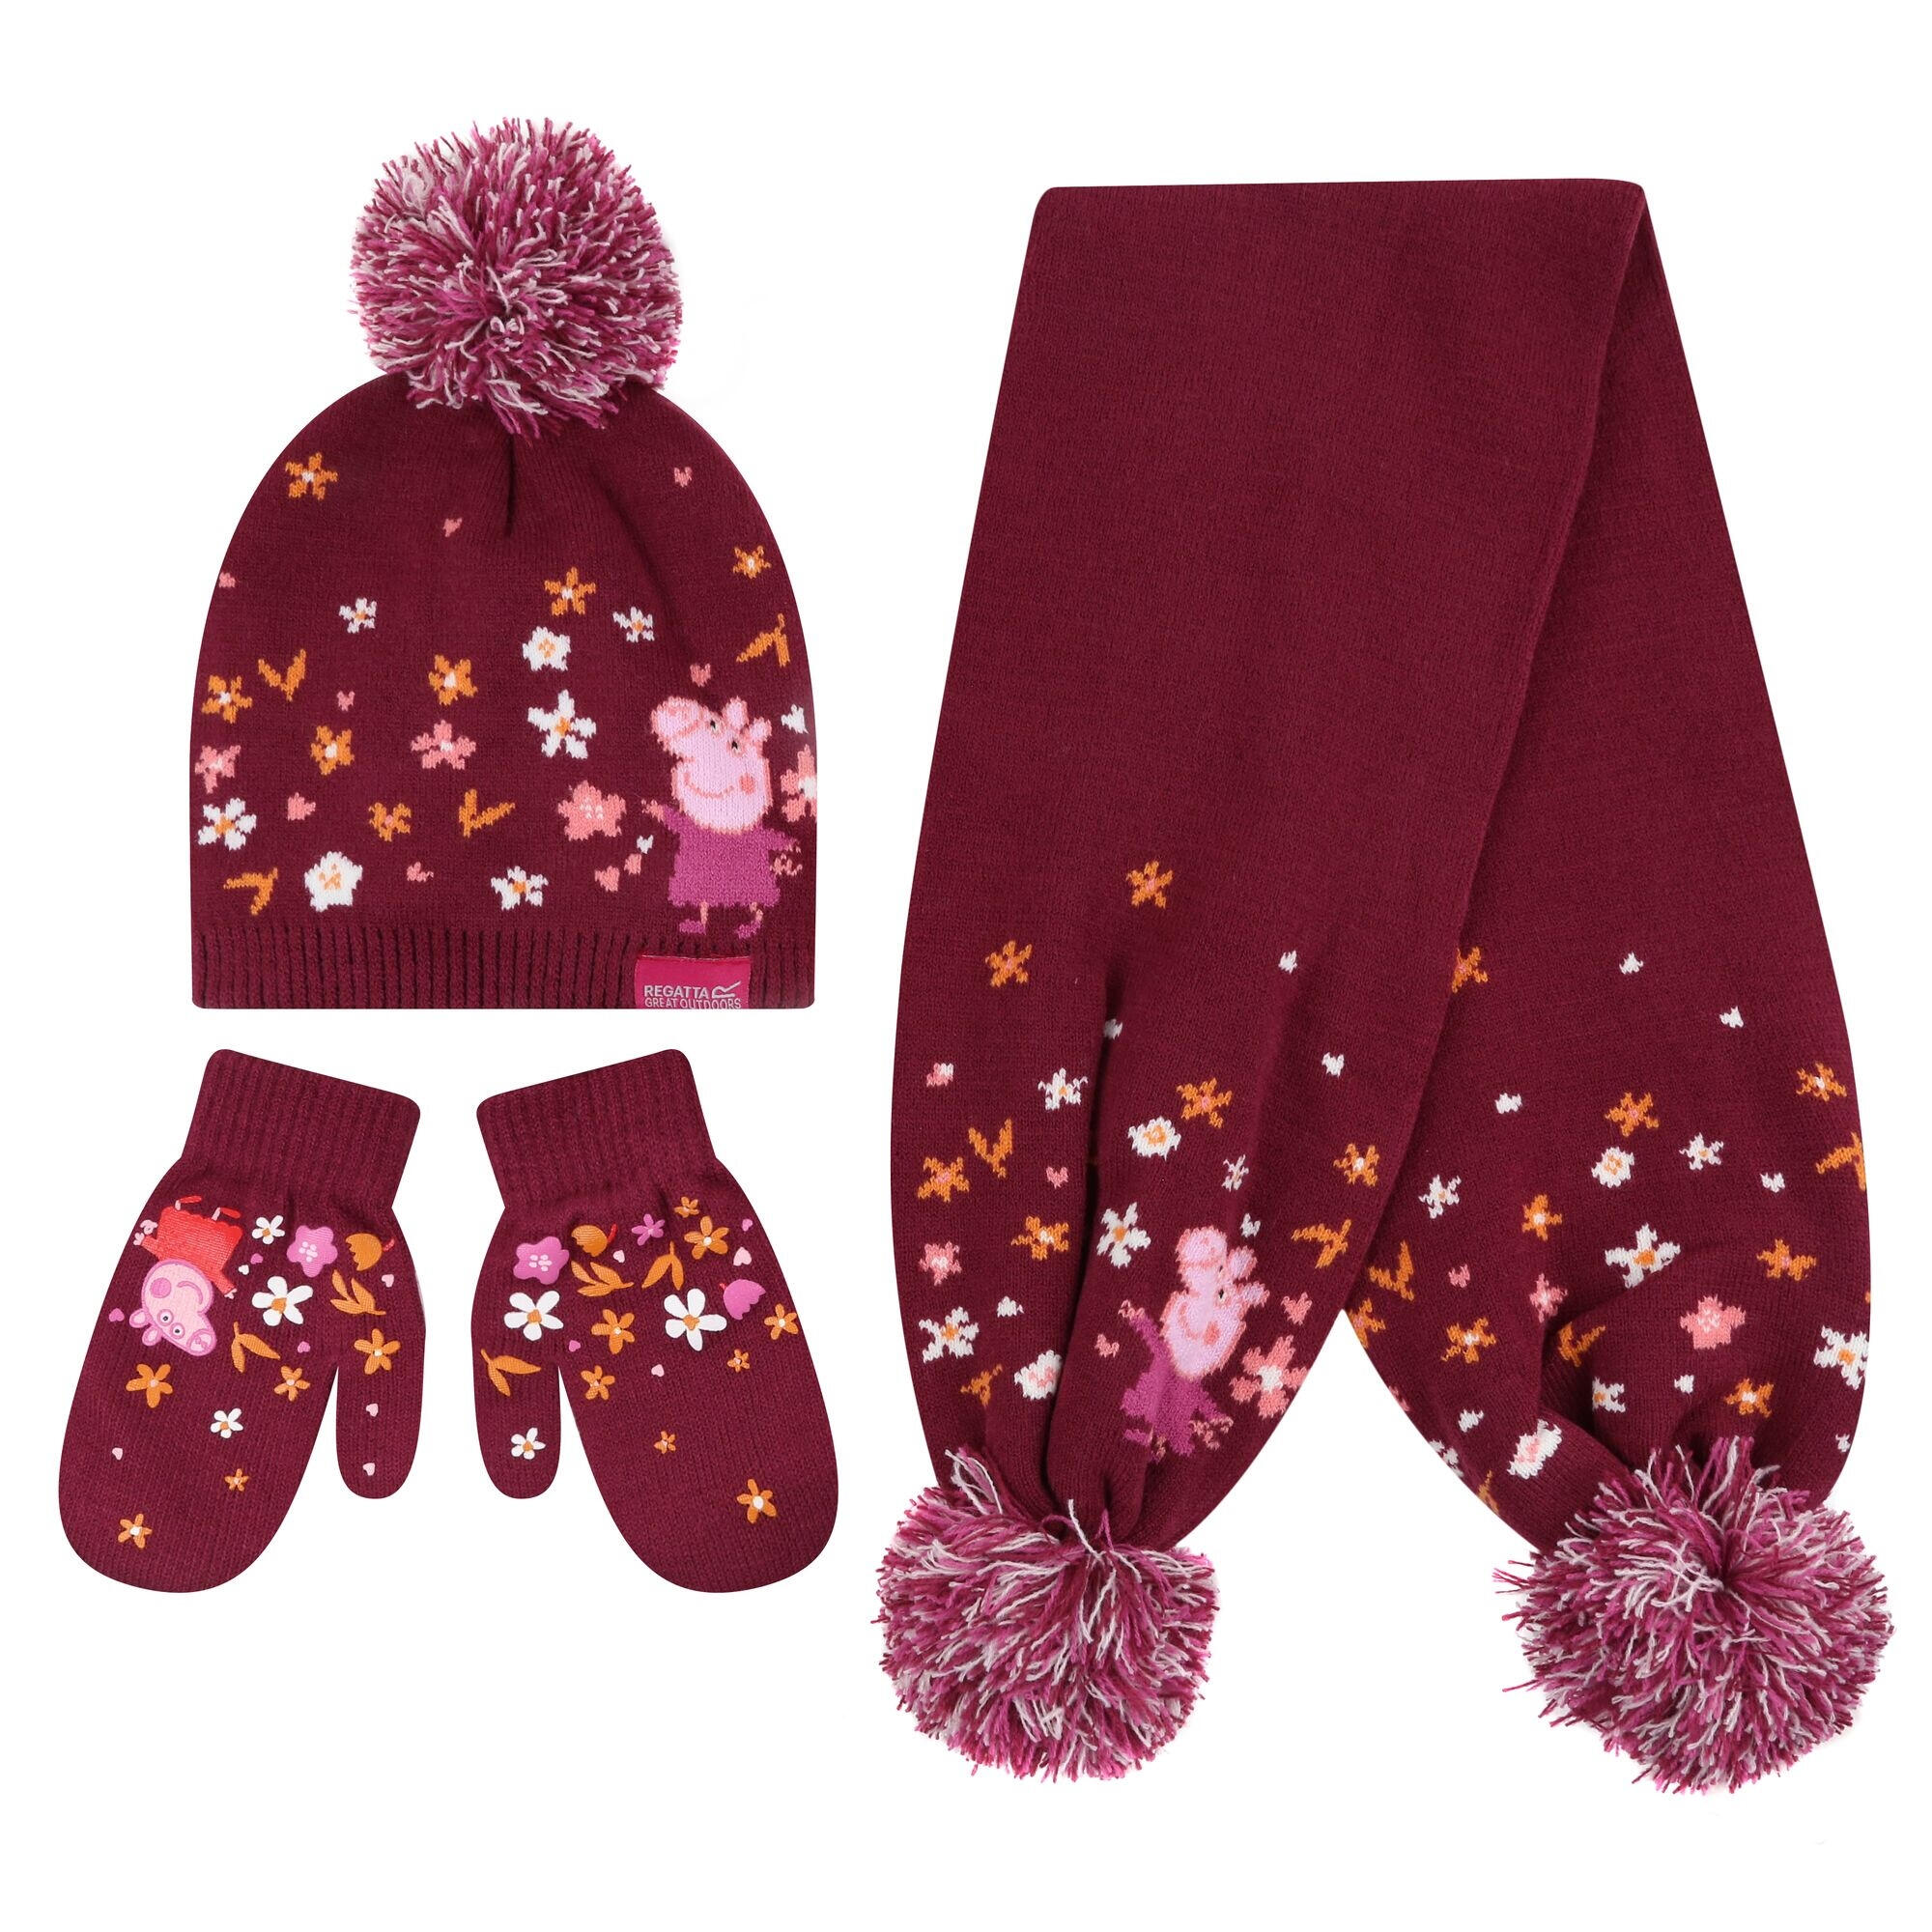 REGATTA Pom Pom Knitted Peppa Pig Hat Gloves And Scarf Set (Berry Pink/Autumn)